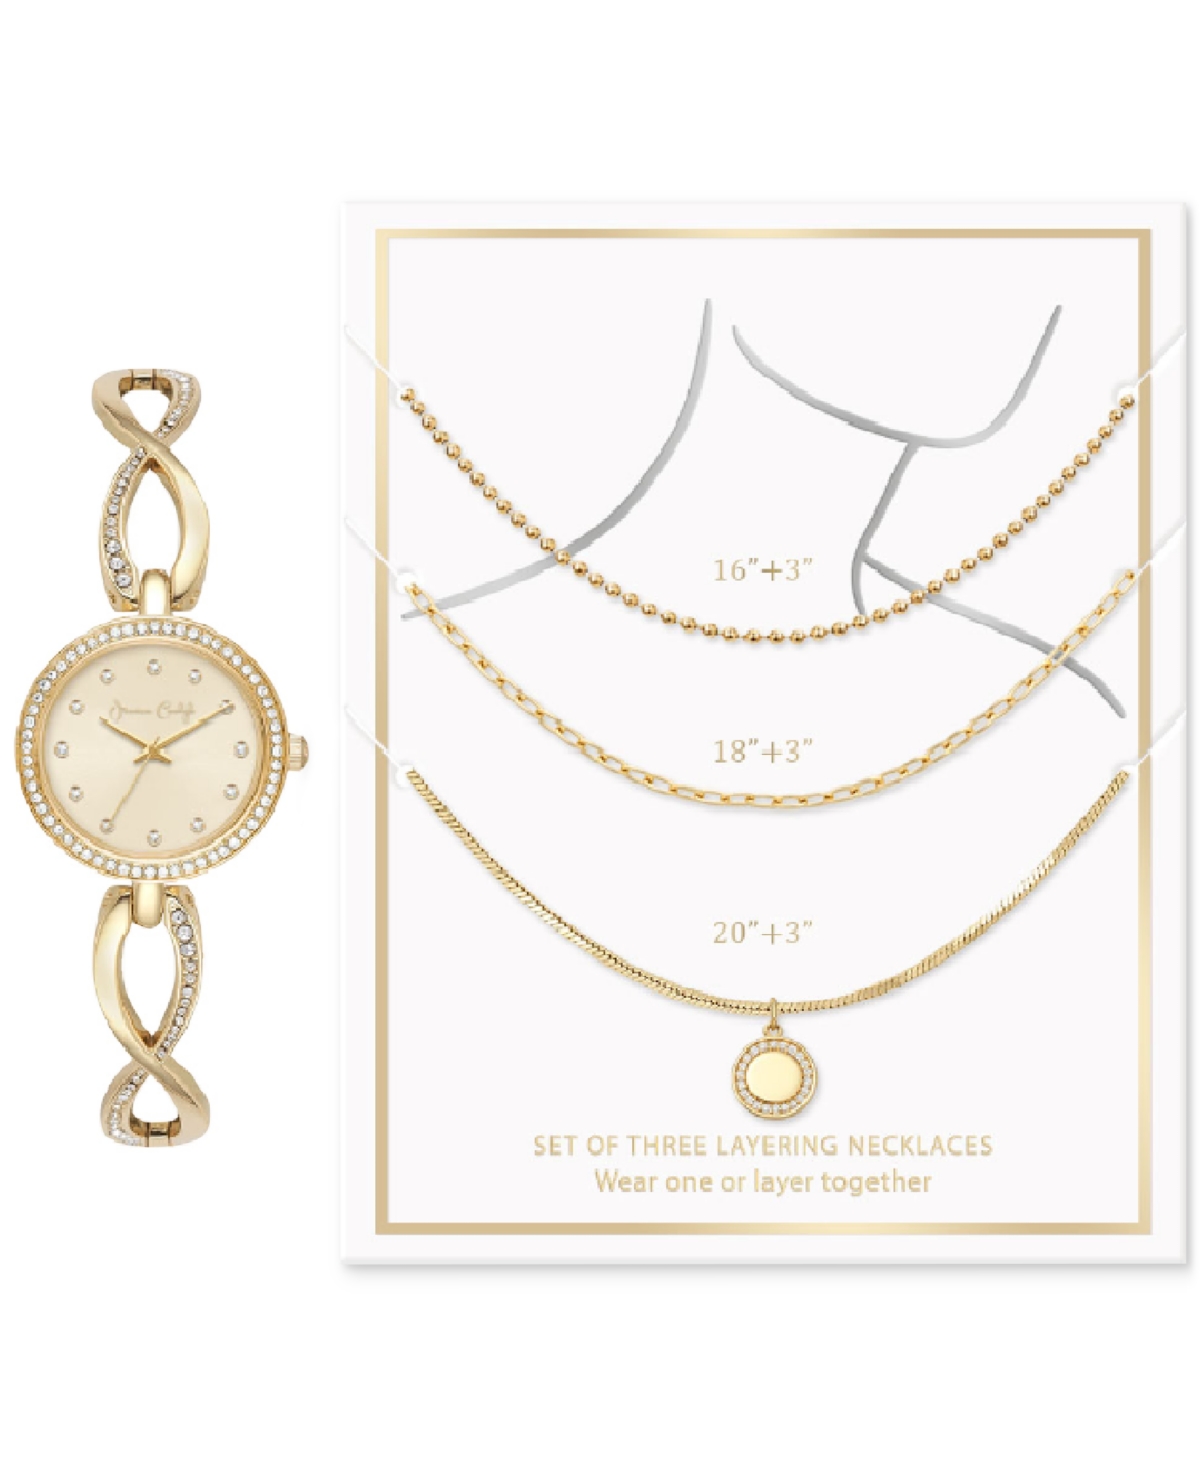 Jessica Carlyle Women's Crystal Bracelet Watch 30mm & 3-pc. Necklace Gift Set In Gold